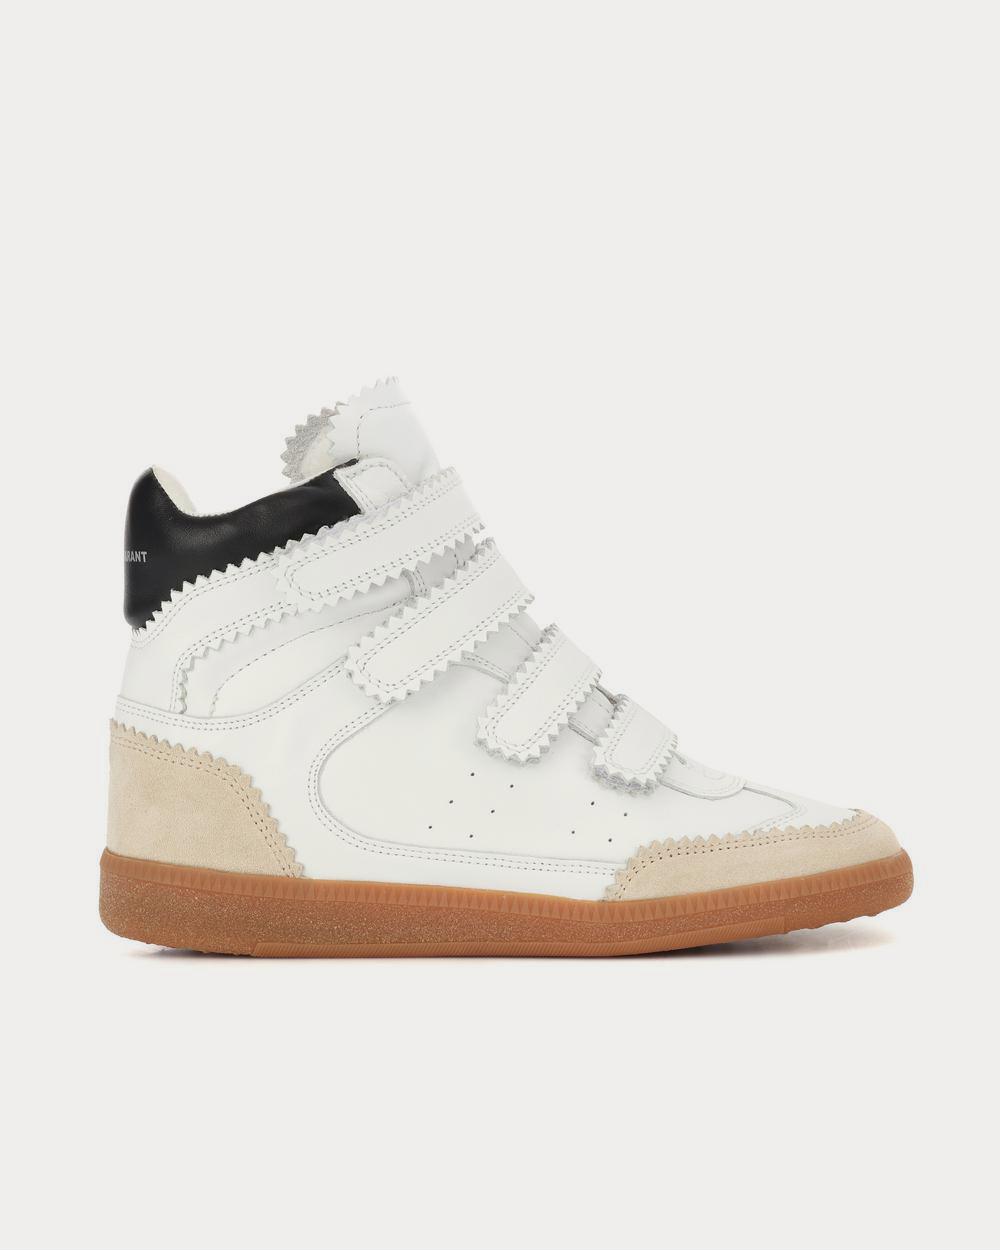 Isabel Marant Bilsy leather White High Top Sneakers - Sneak in Peace